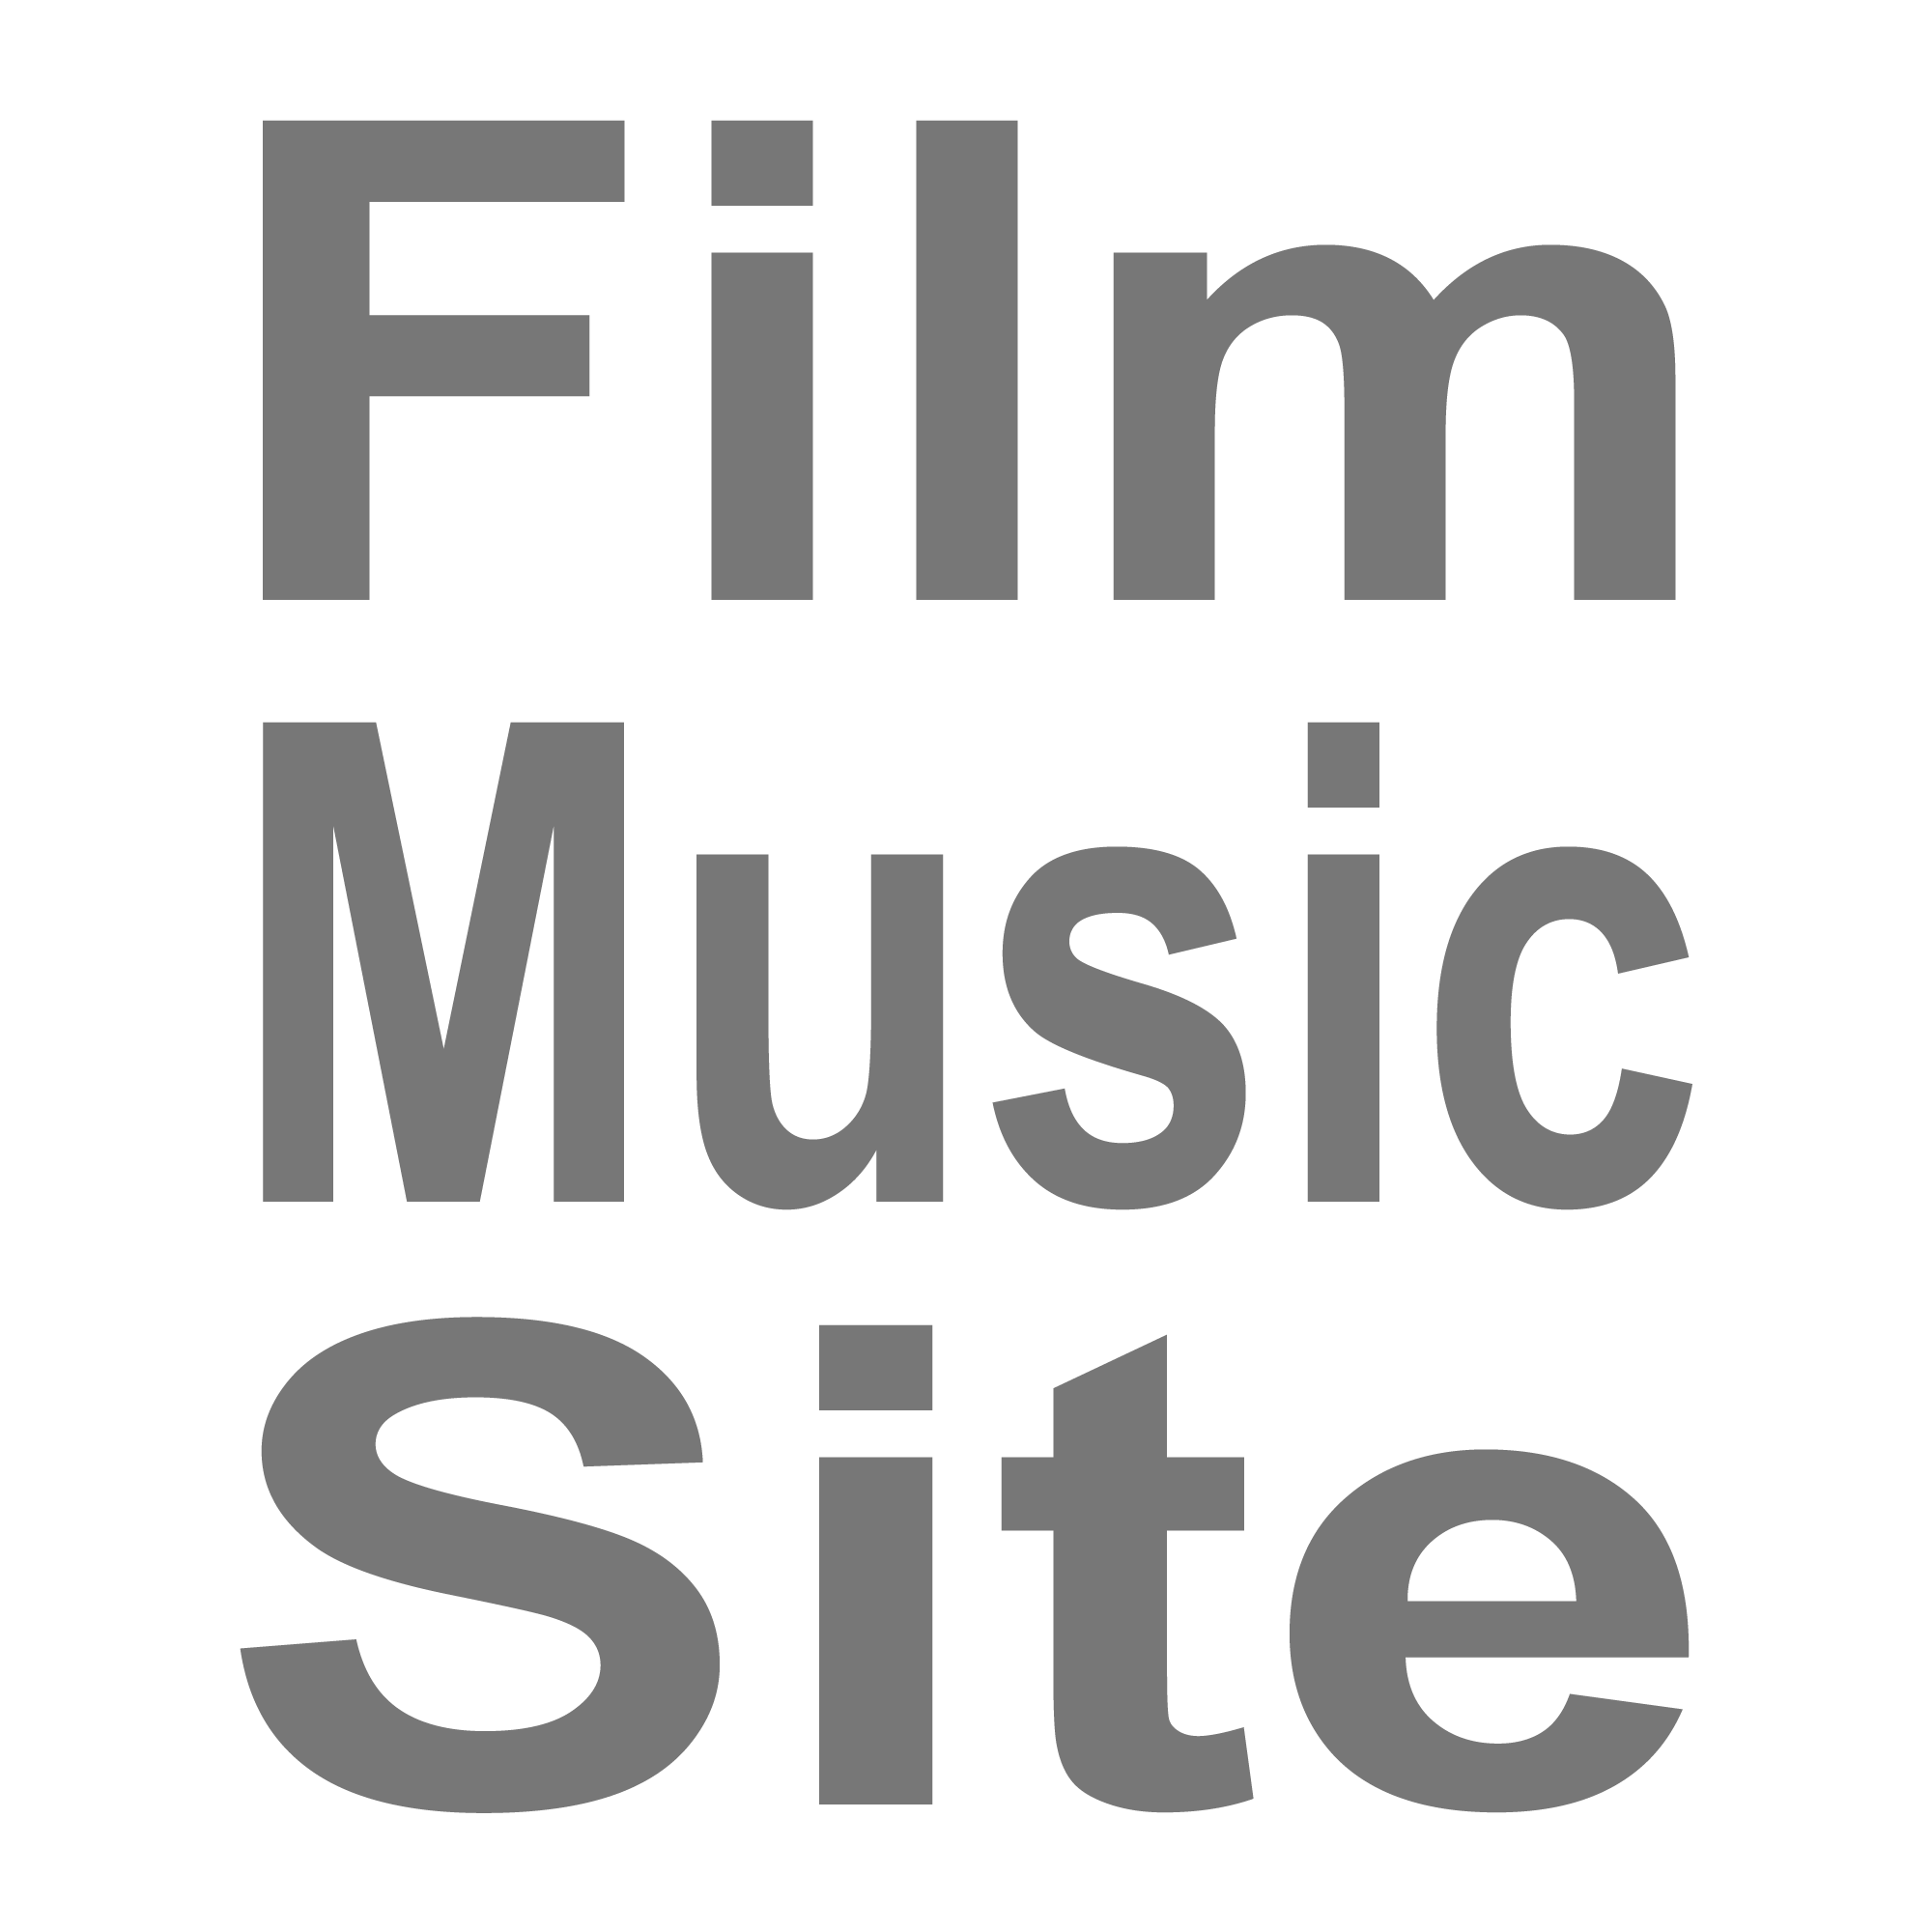 Daily film music news by https://t.co/TxvR6WWGsm, the largest online film music resource covering movie, video game, musical and television soundtracks.